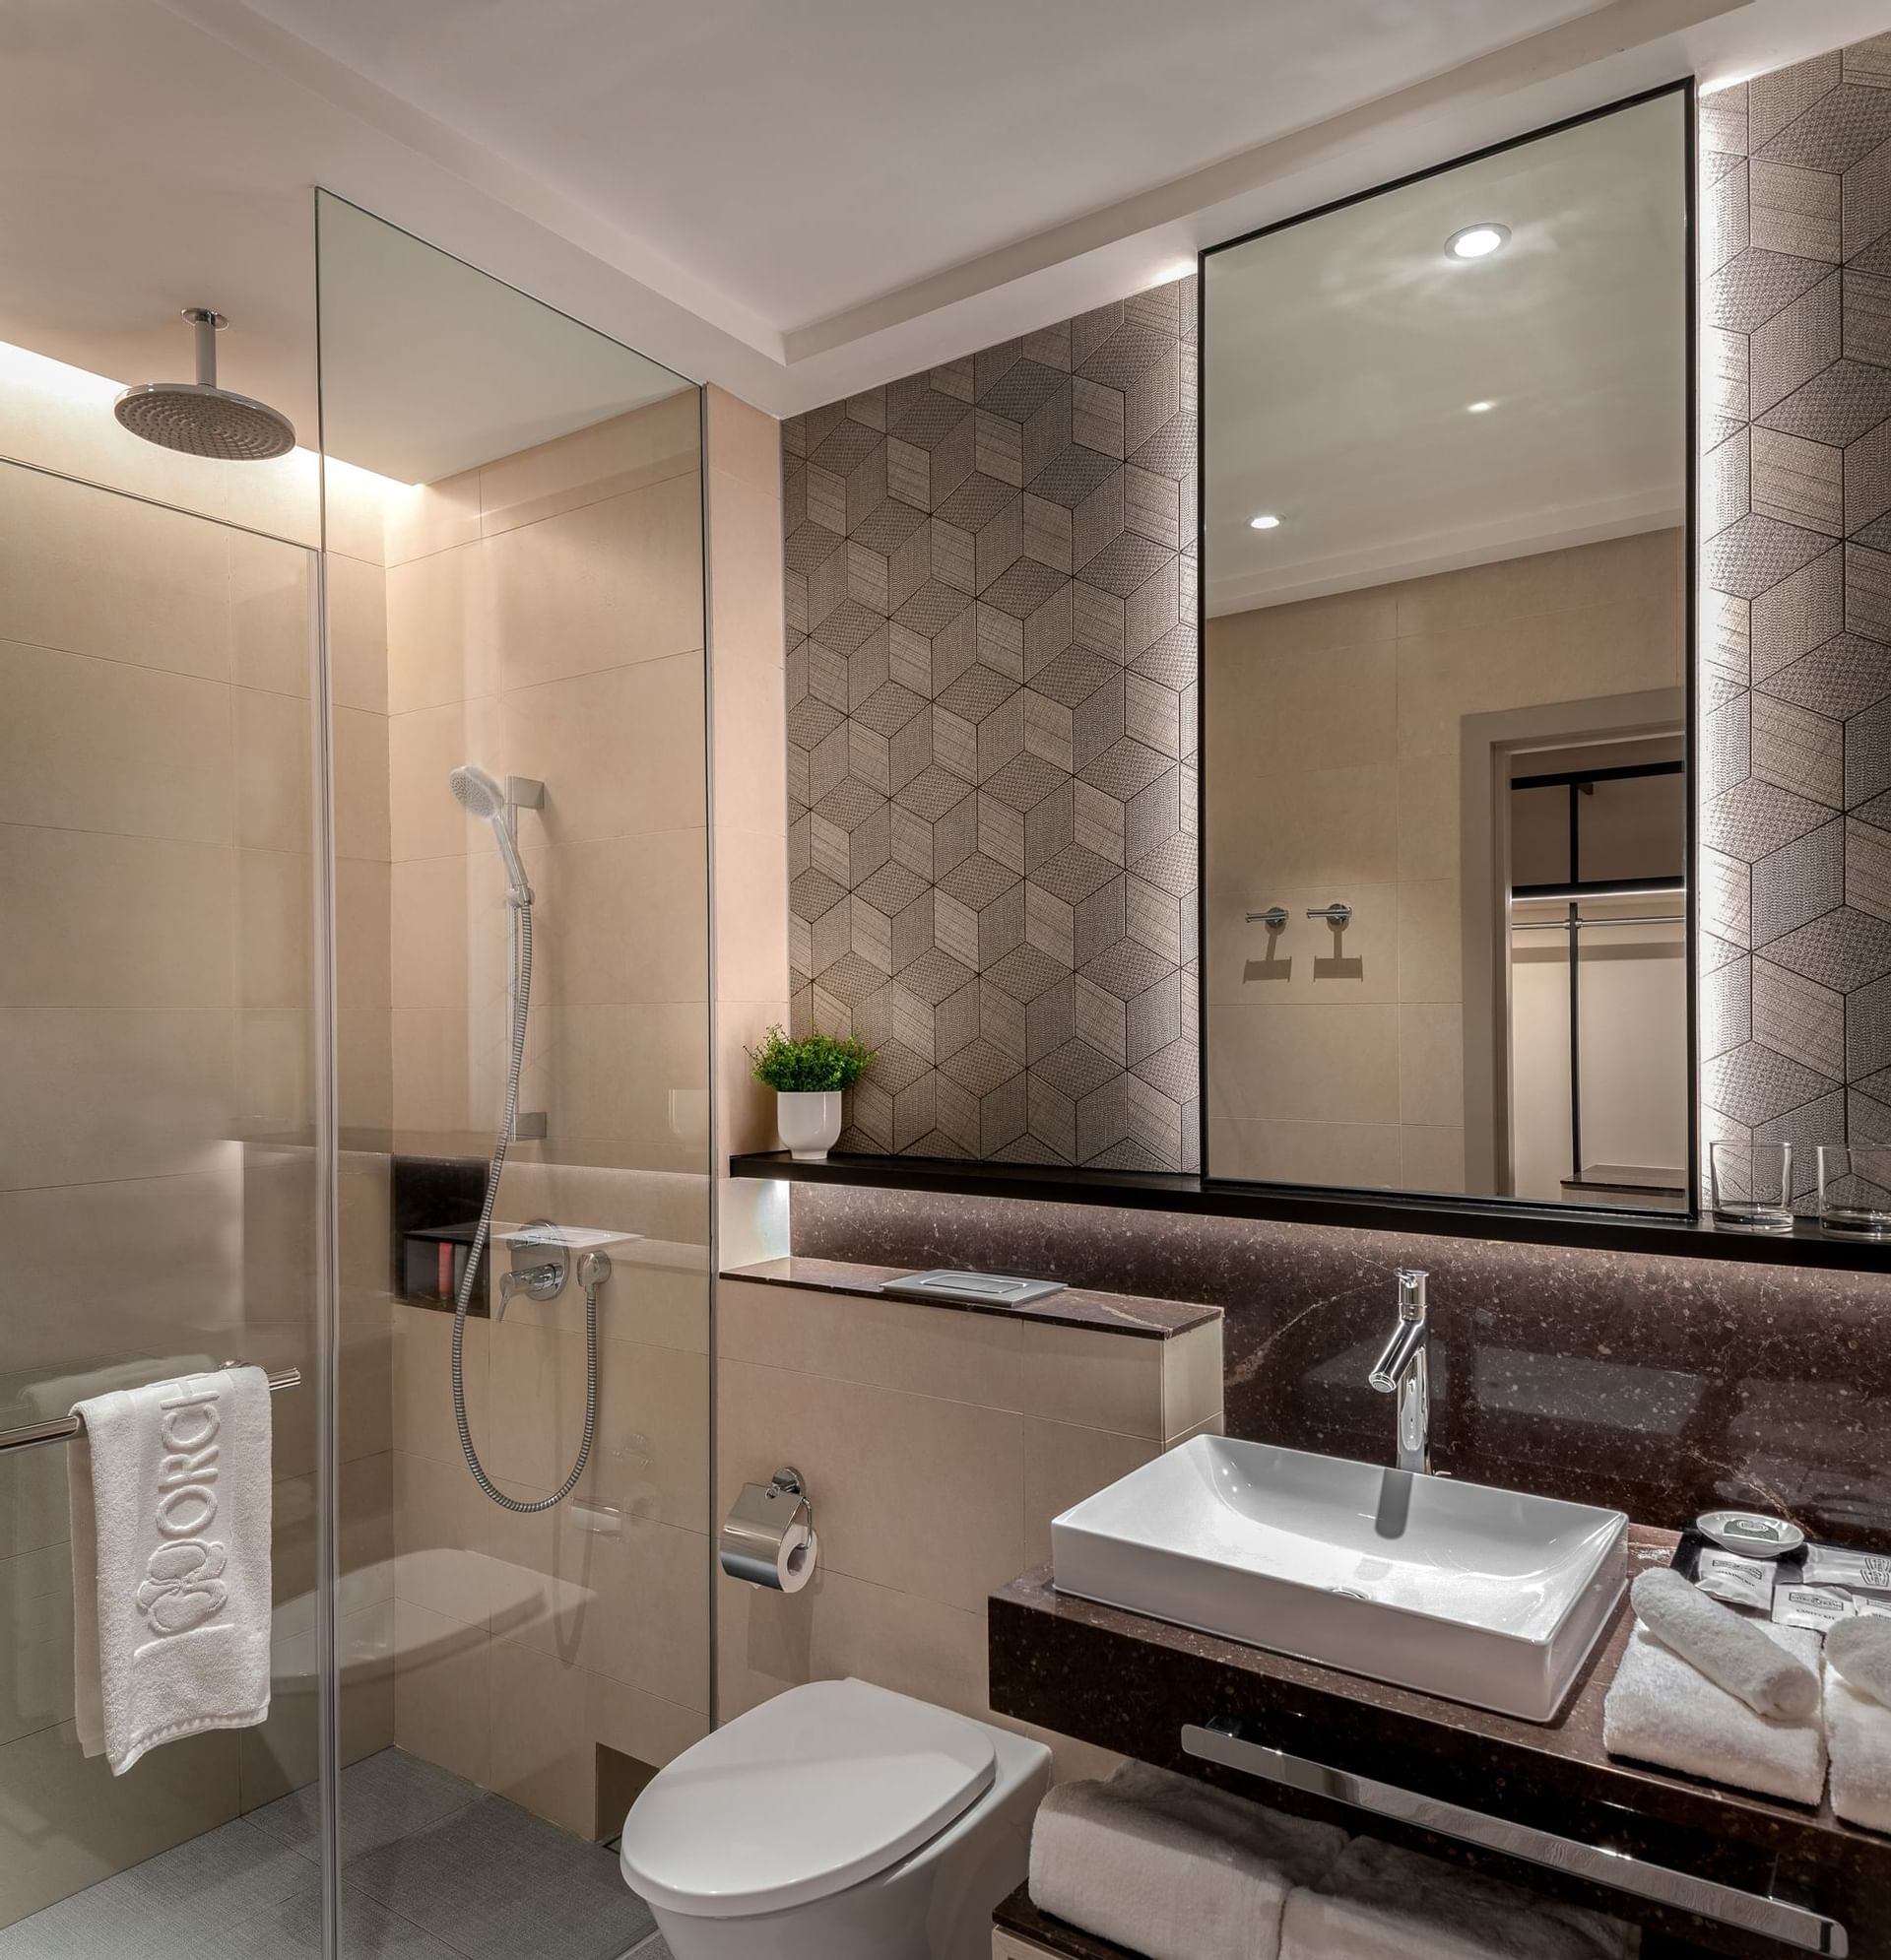 Singapore Hotel Rooms & Booking | Orchid Hotel Singapore